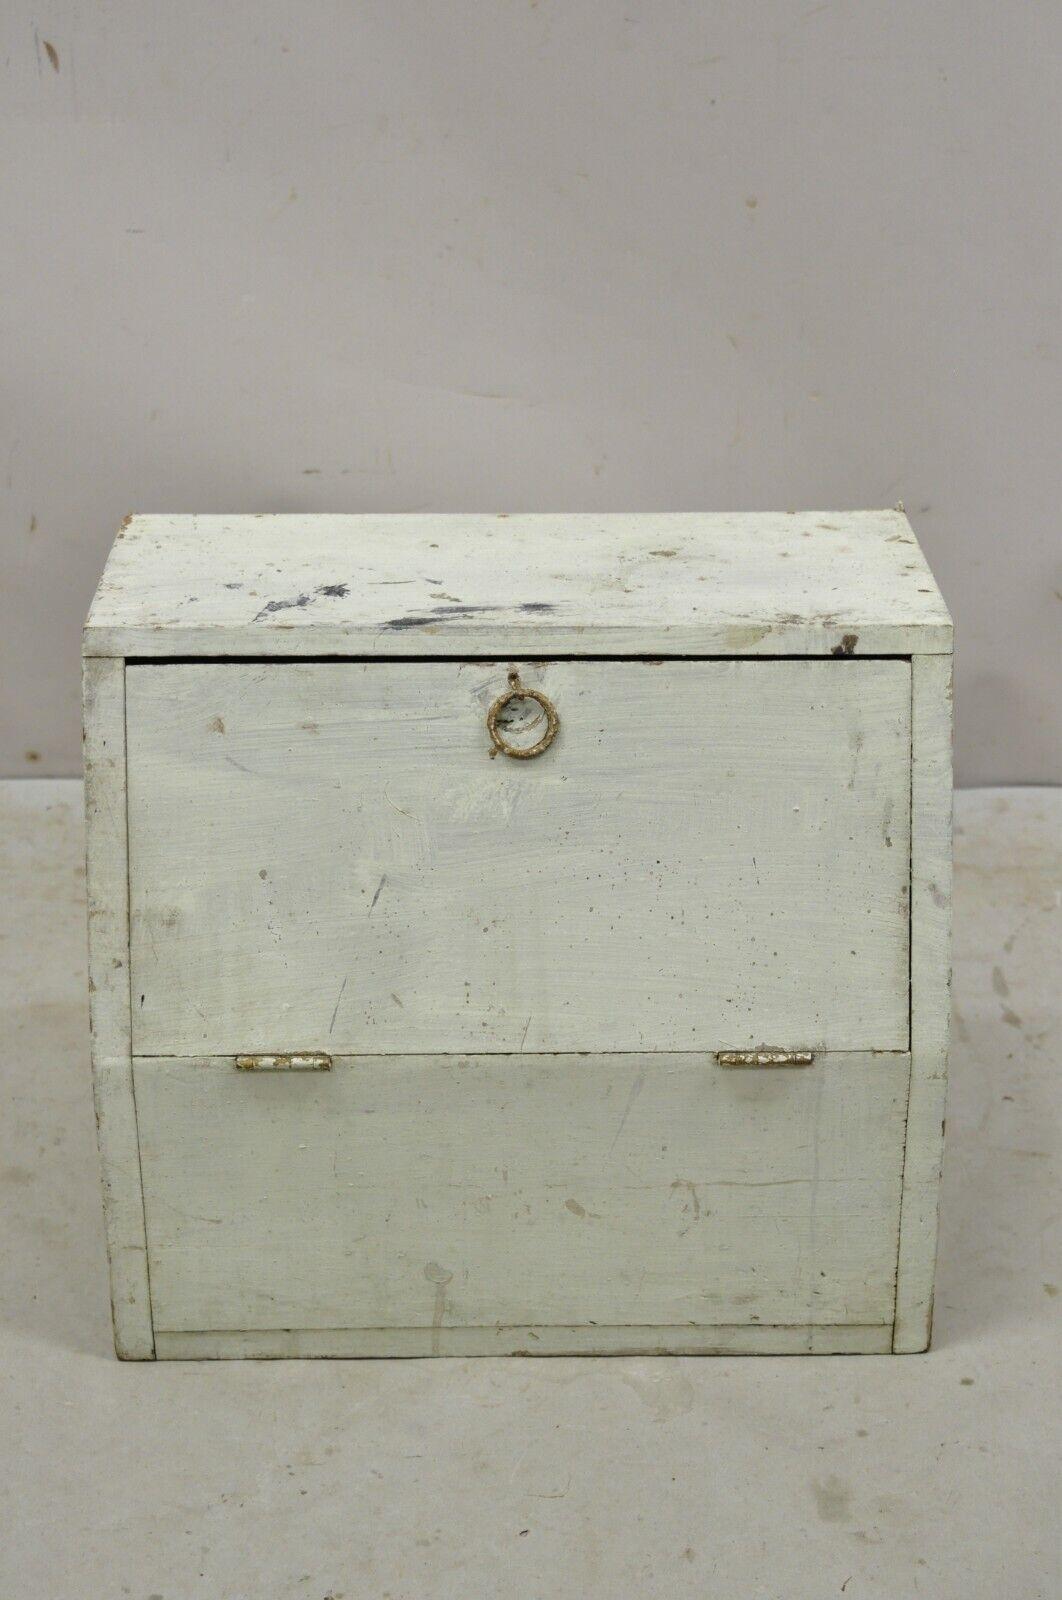 Vintage Arts & Crafts Wooden Green Painted Shoe Polish Box Tool Chest. CIRCA Anfang des 20. Jahrhunderts. Abmessungen: 15